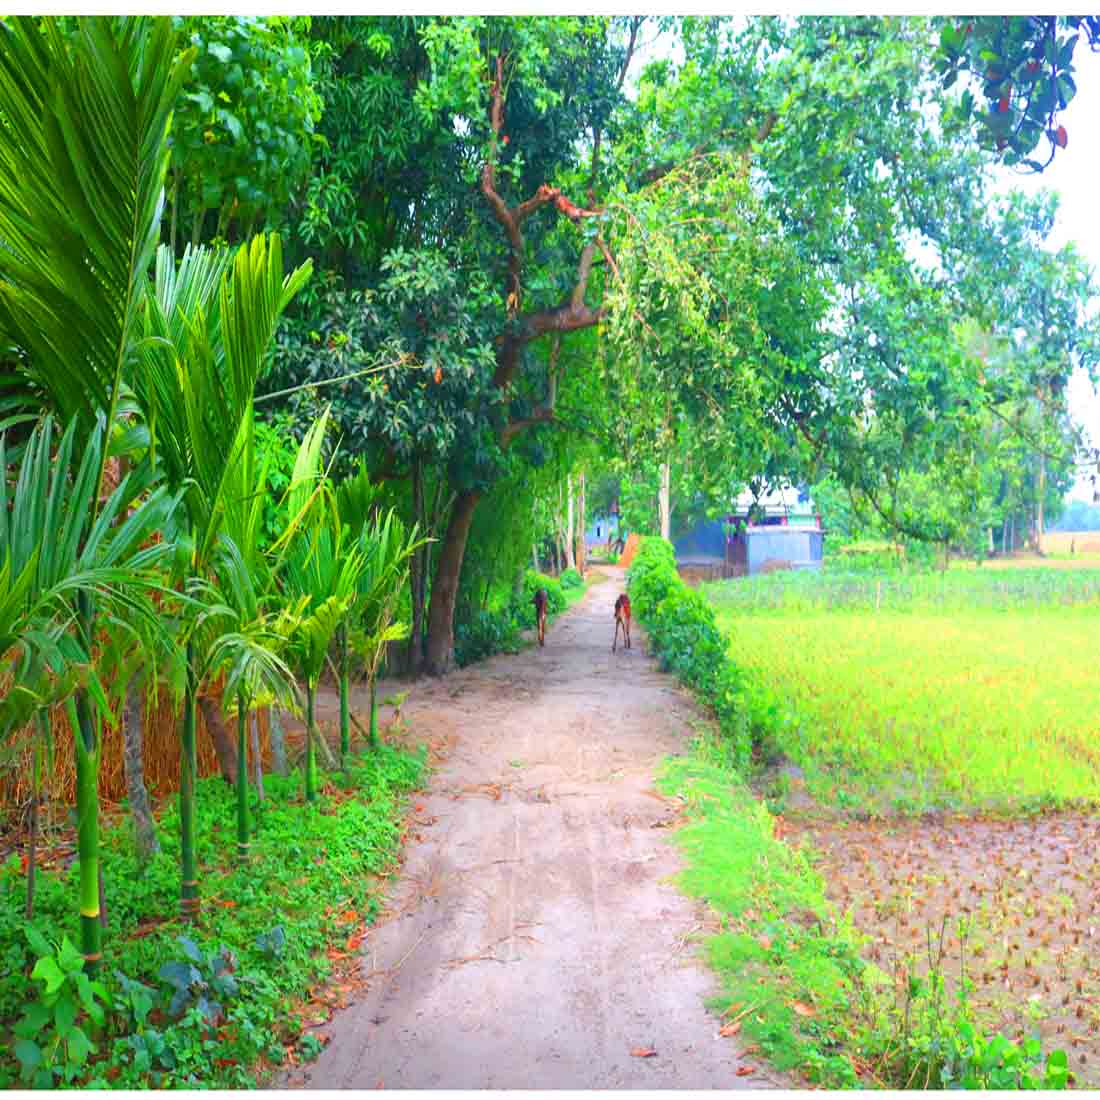 Ghar Tree Photography in Bangladesh preview image.